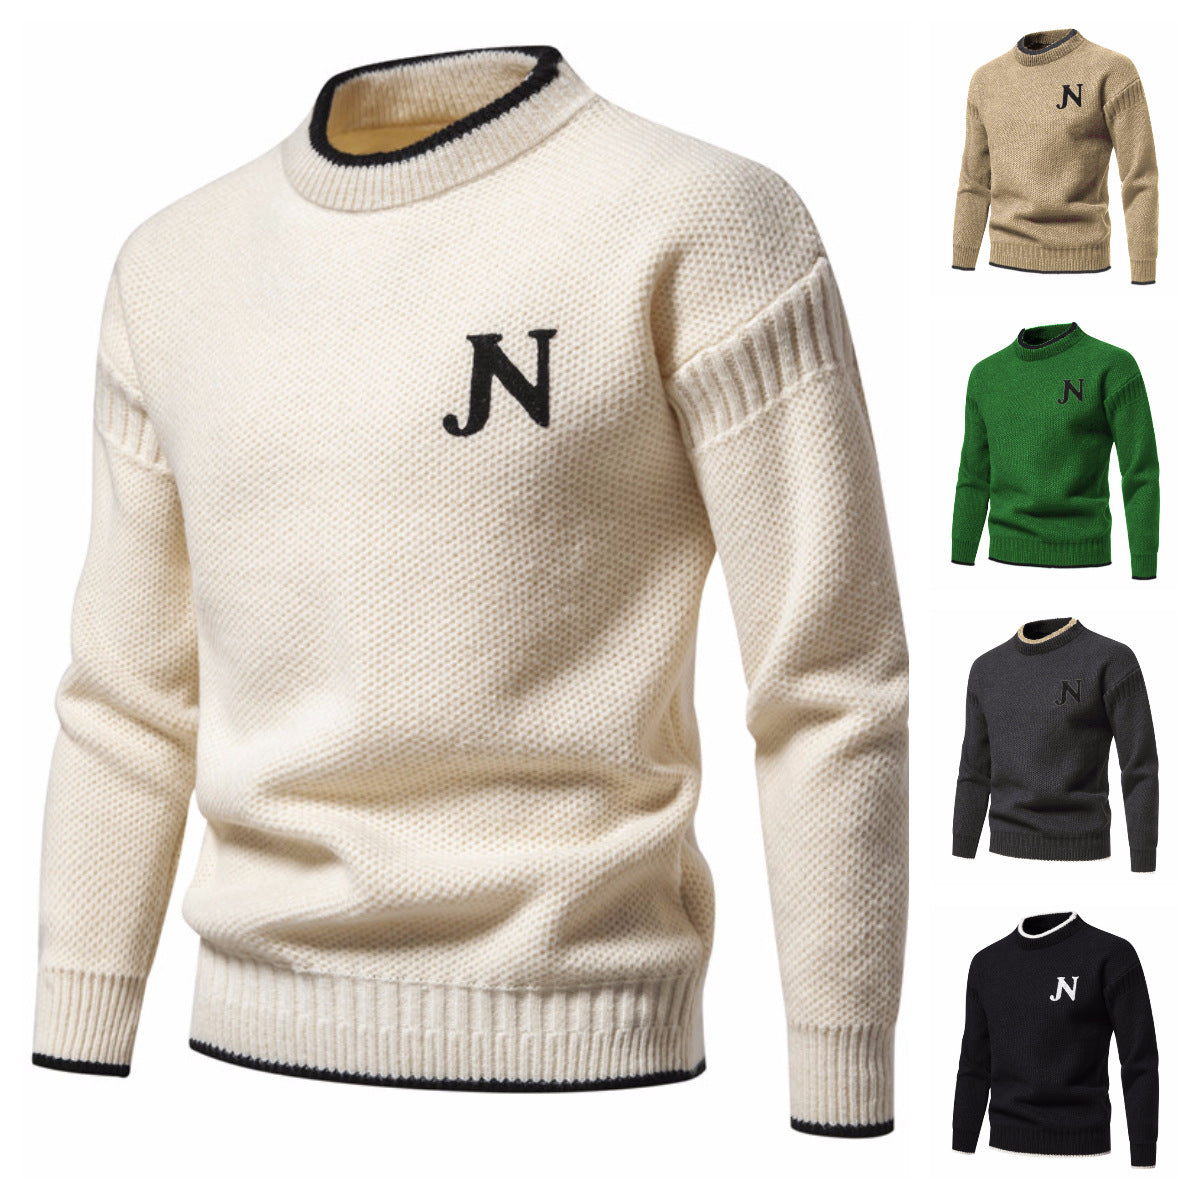 Trendy Leisure Warm Knitted Bottoming Shirt Youth Sweater